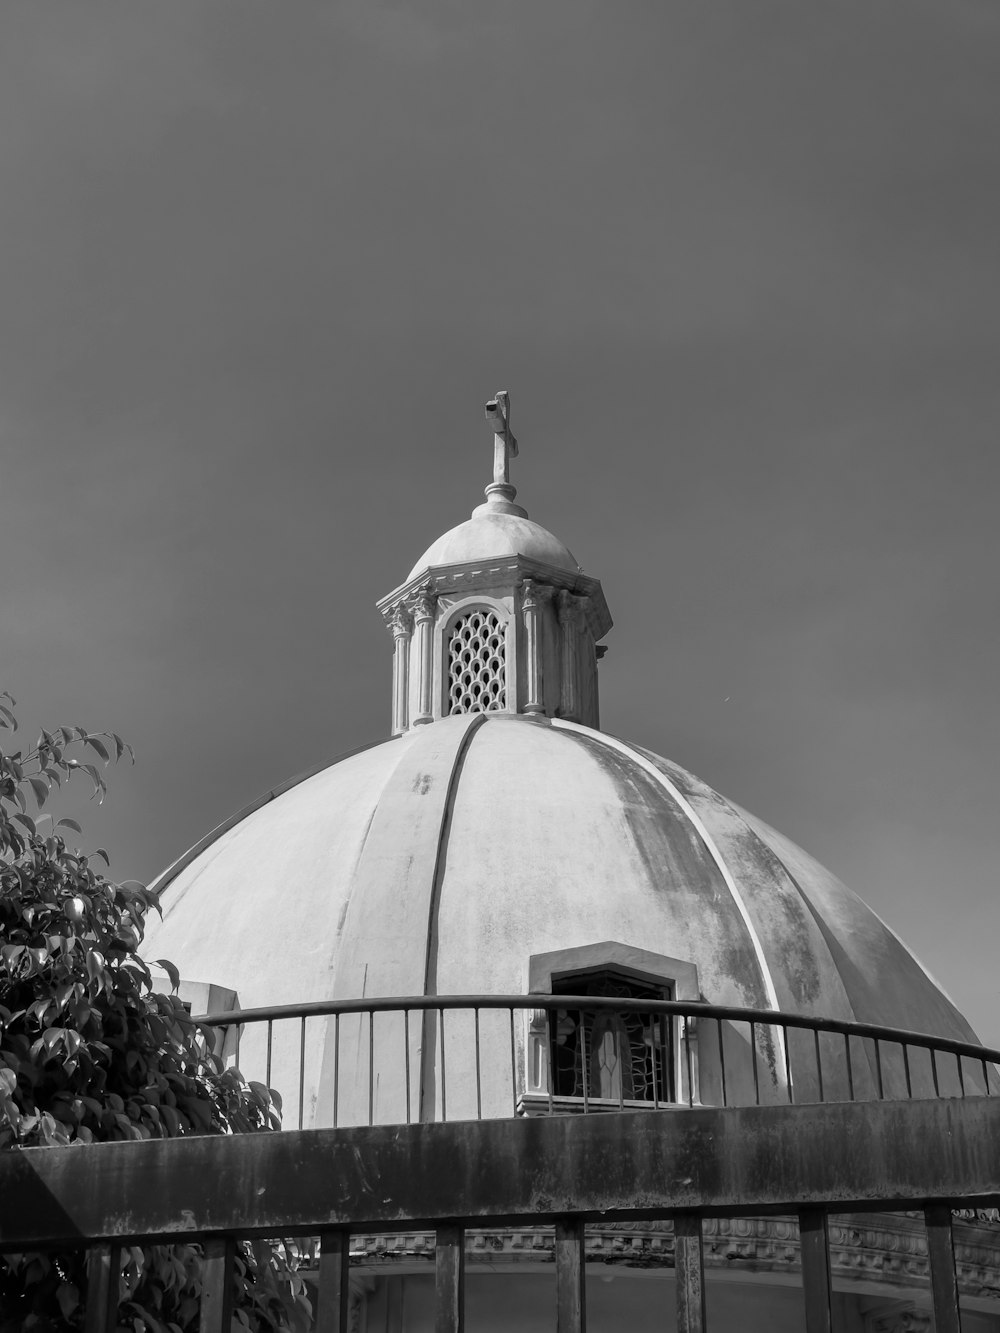 a black and white photo of a dome with a cross on top